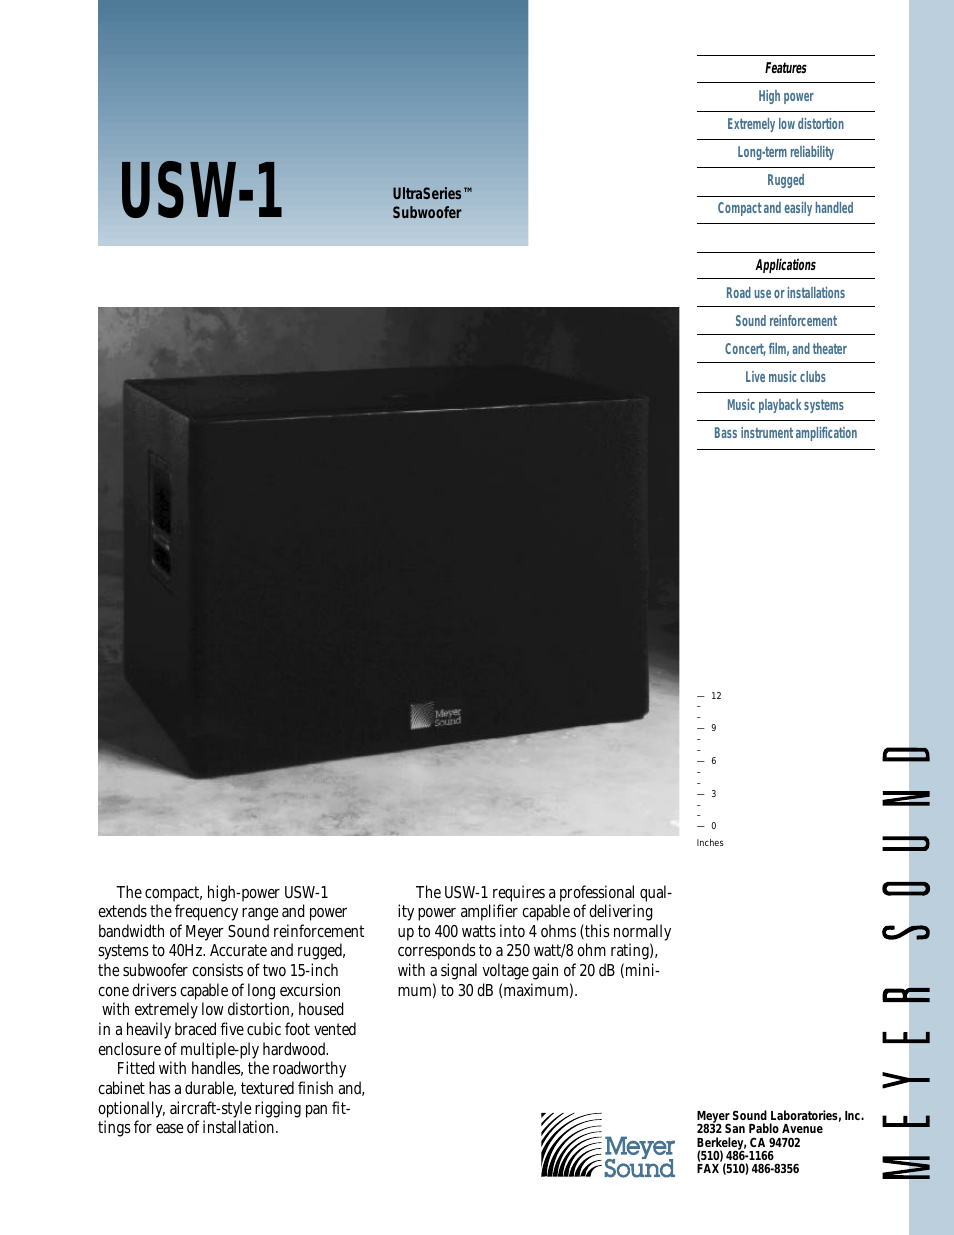 UltraSeries Subwoofer USW-1